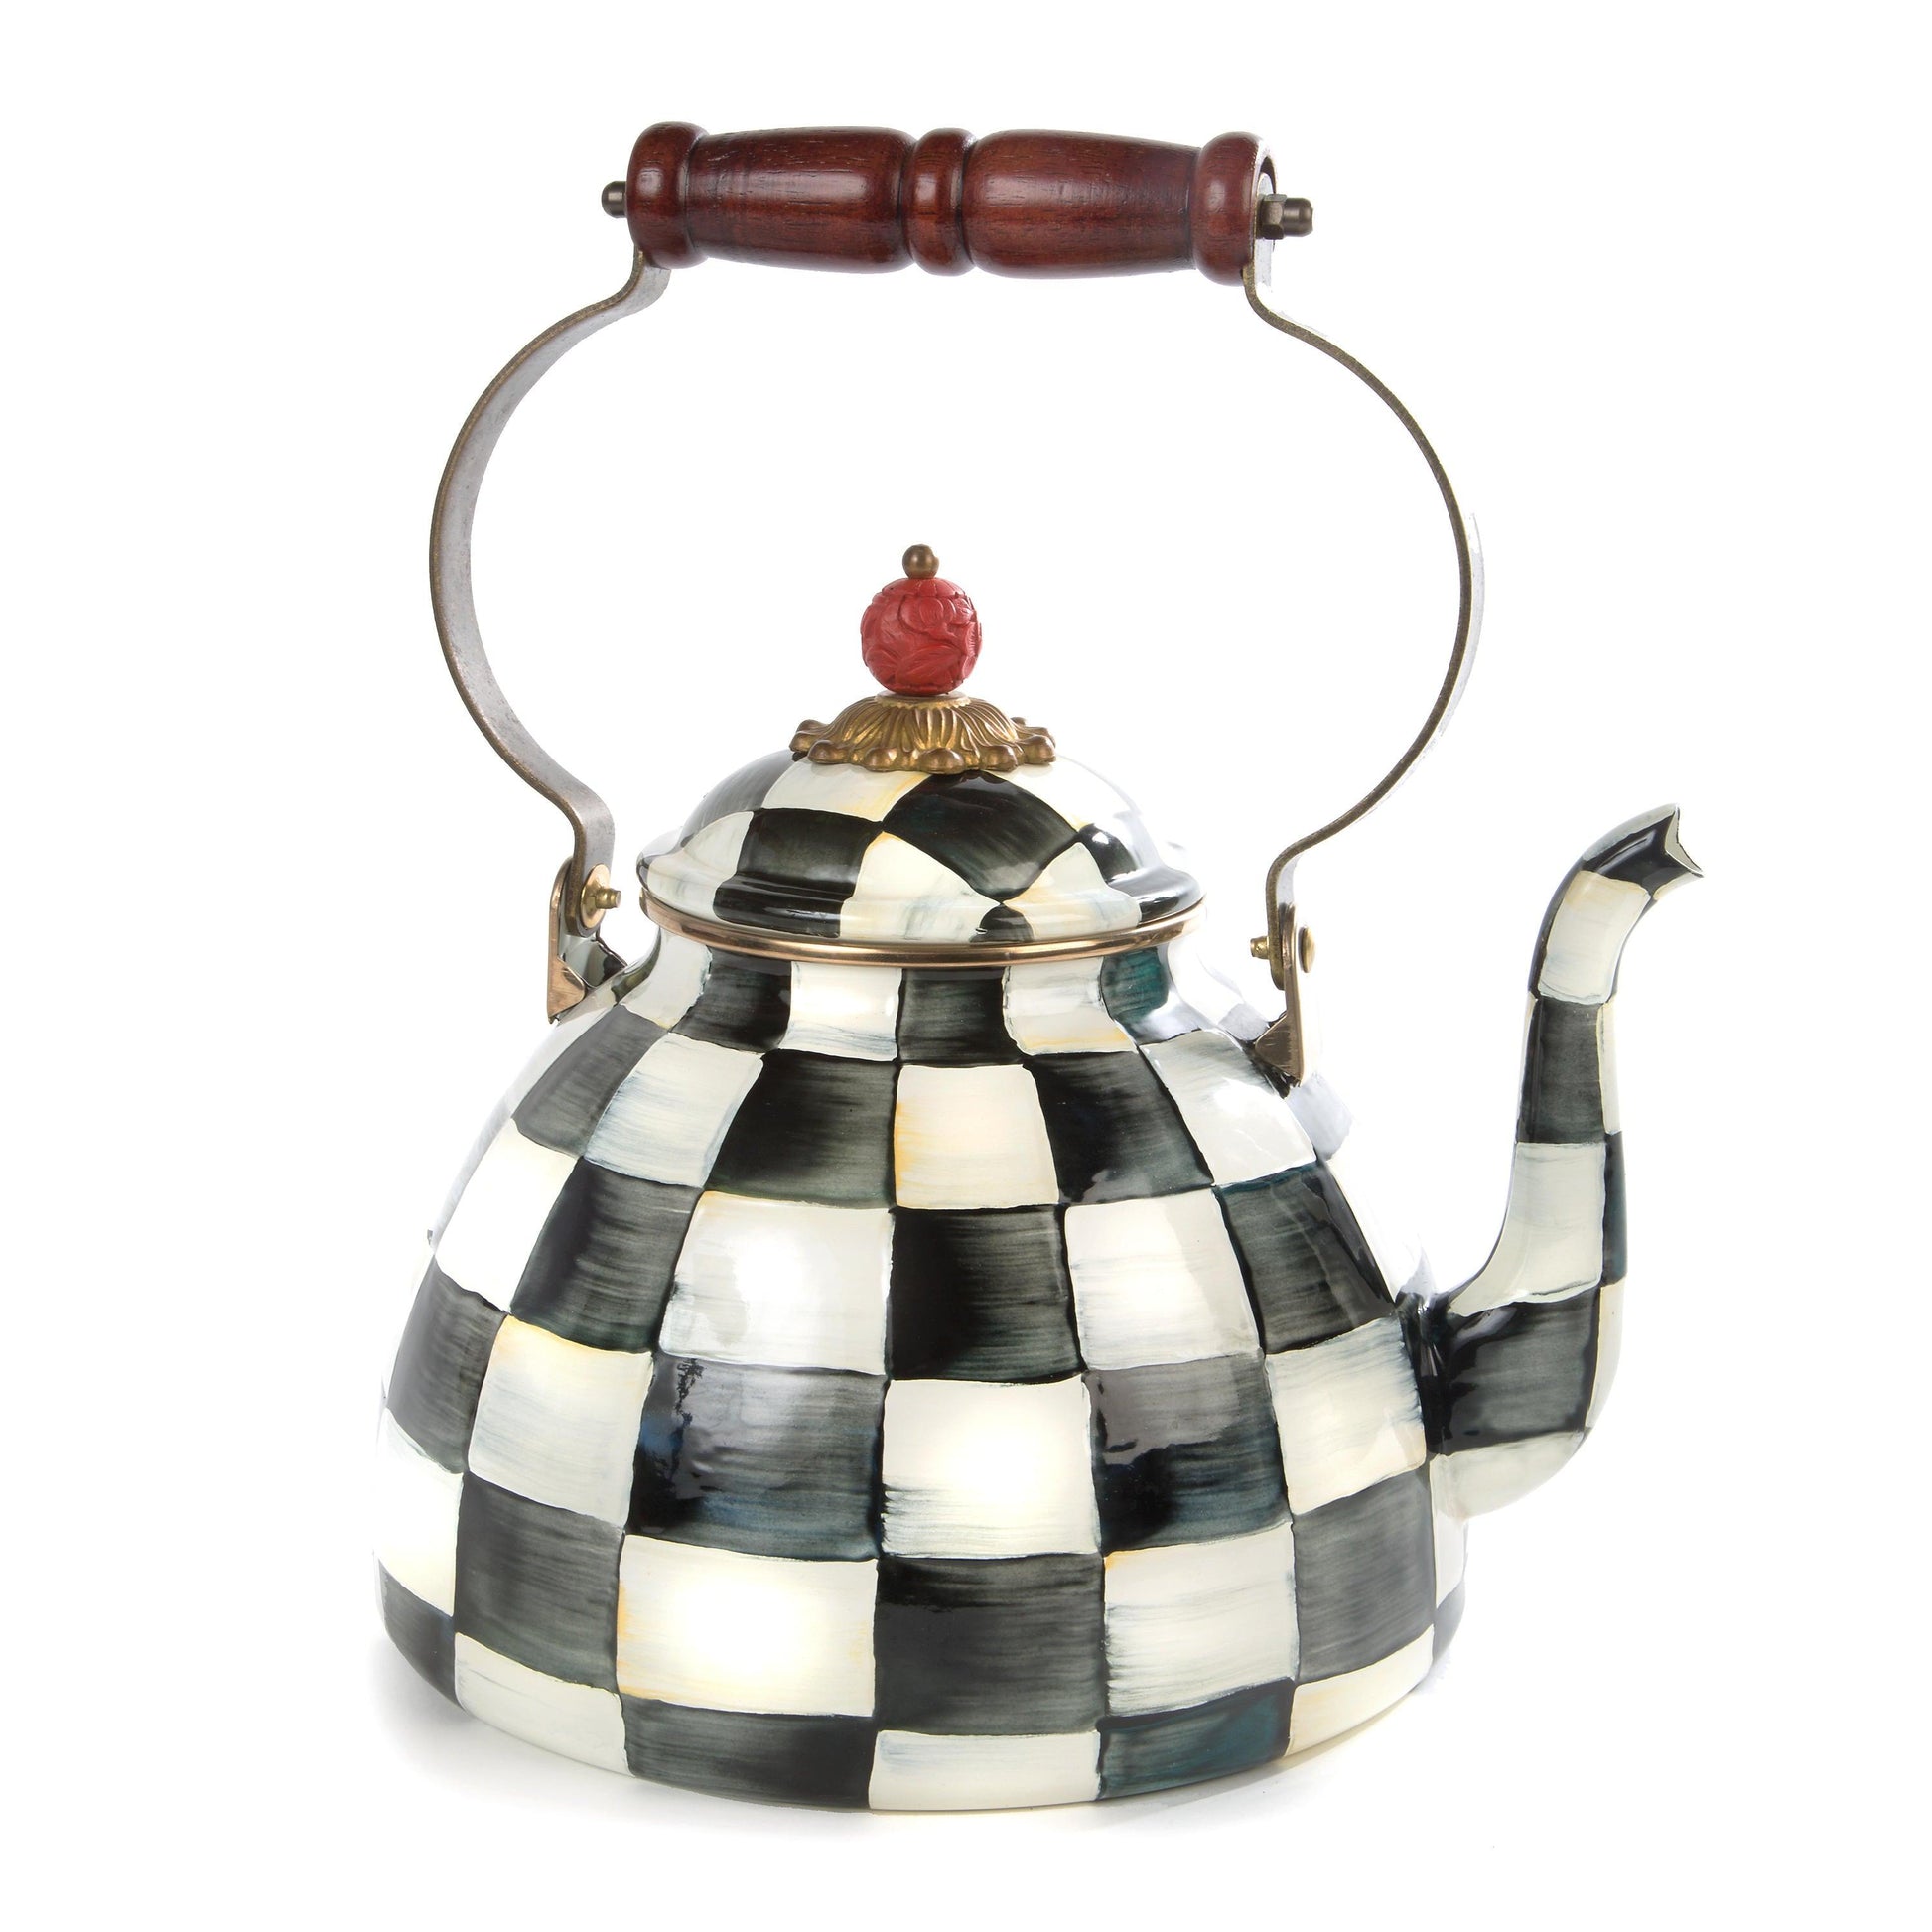 Courtly Check Enamel Tea Kettle - 3Qt (Mackenzie Childs) - Gallery Gifts Online 